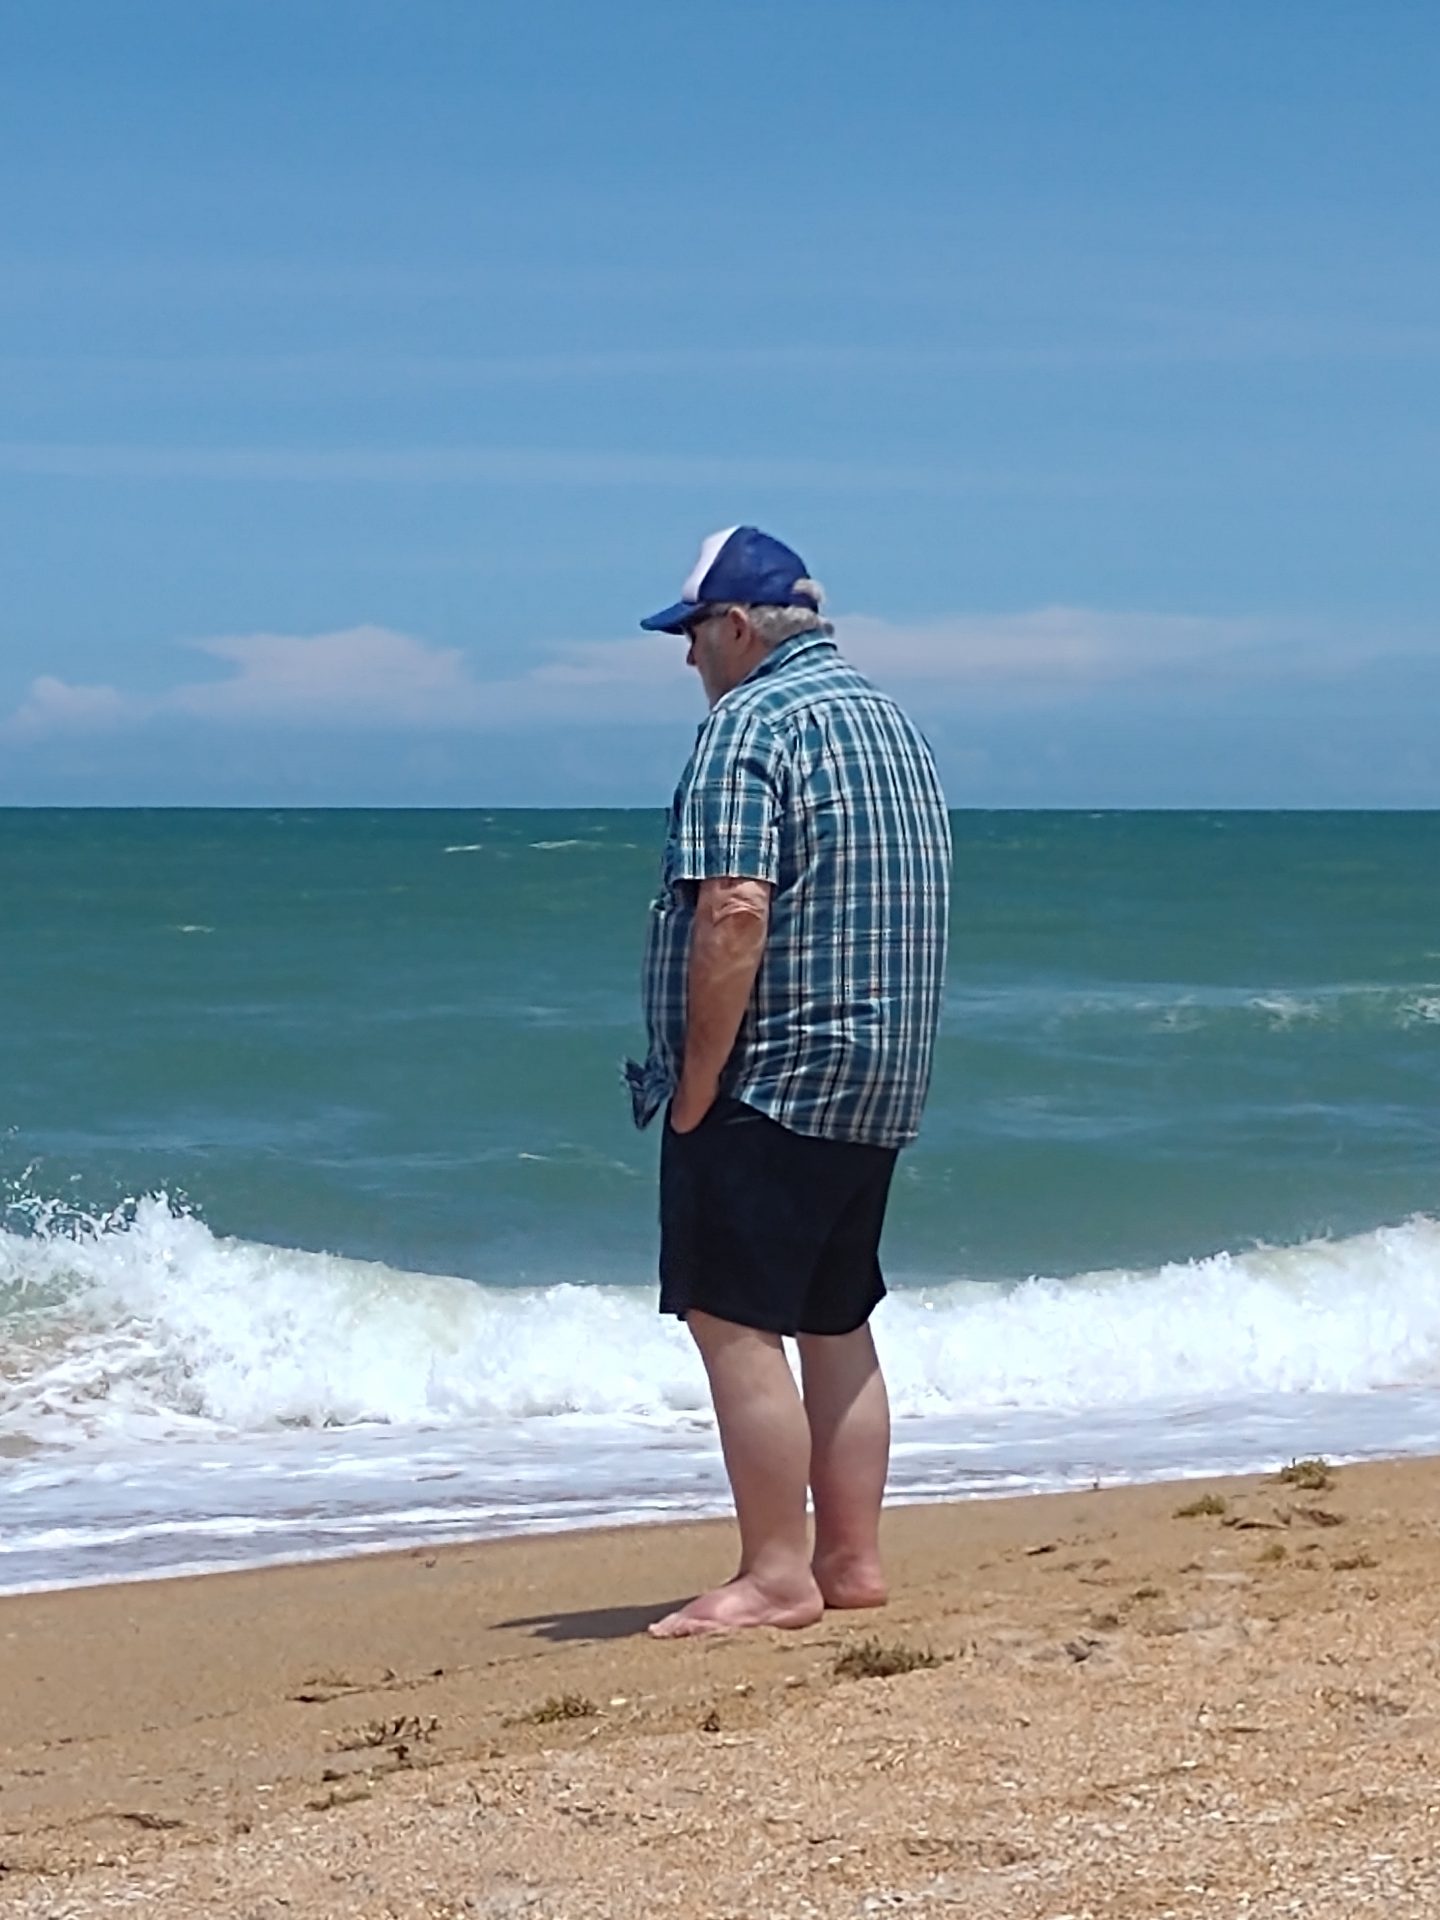 Dad always enjoyed the beauty of the ocean!